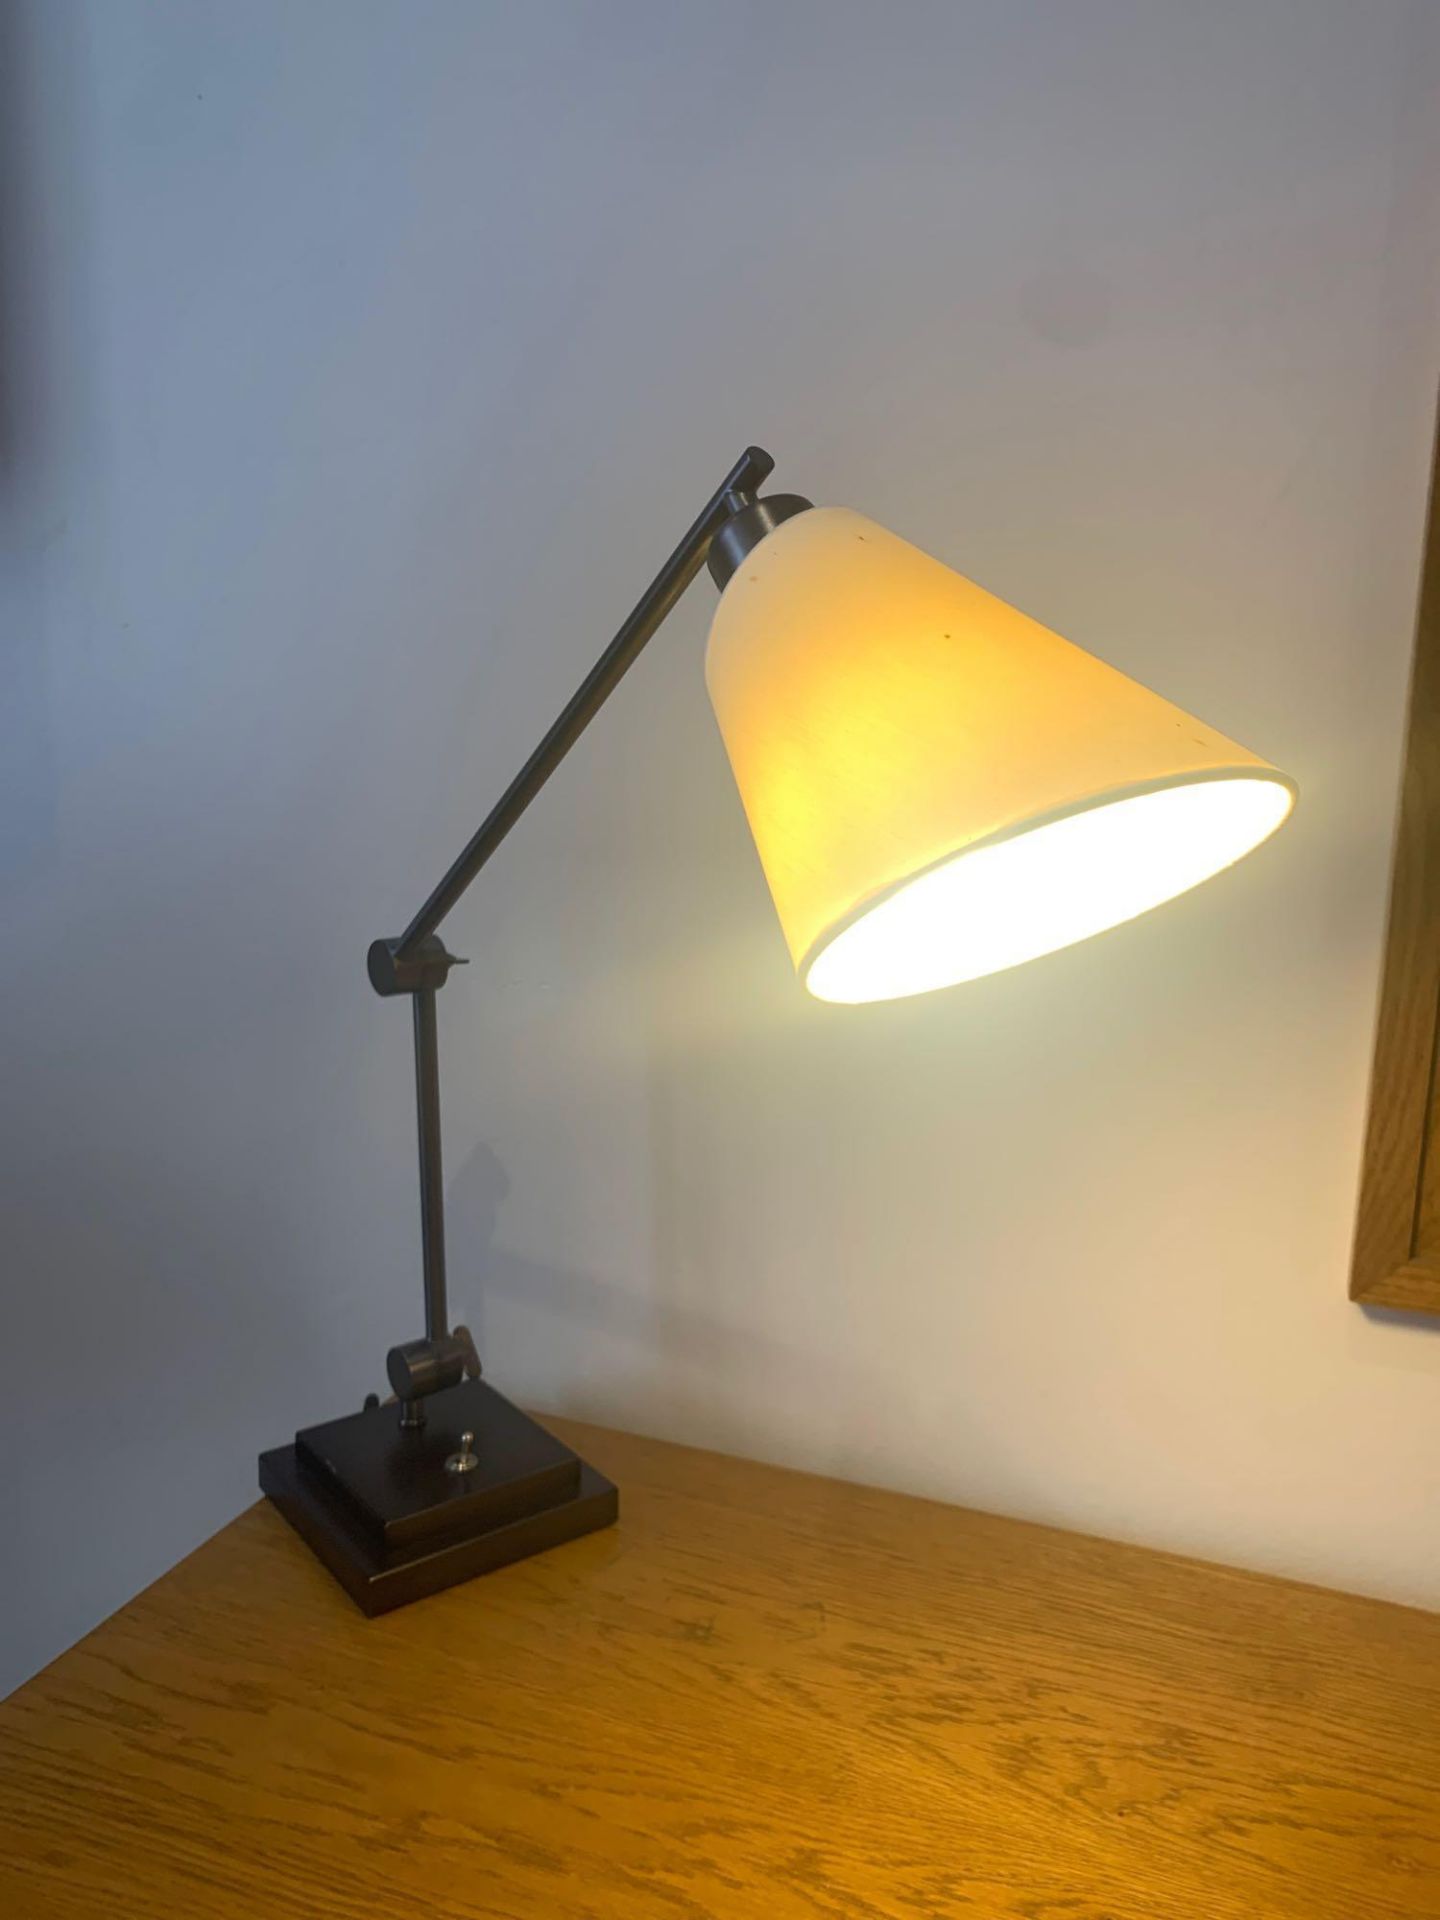 Chelsom desk study desk lamp with heavy stepped base and two toothed locking key swivel joints. base